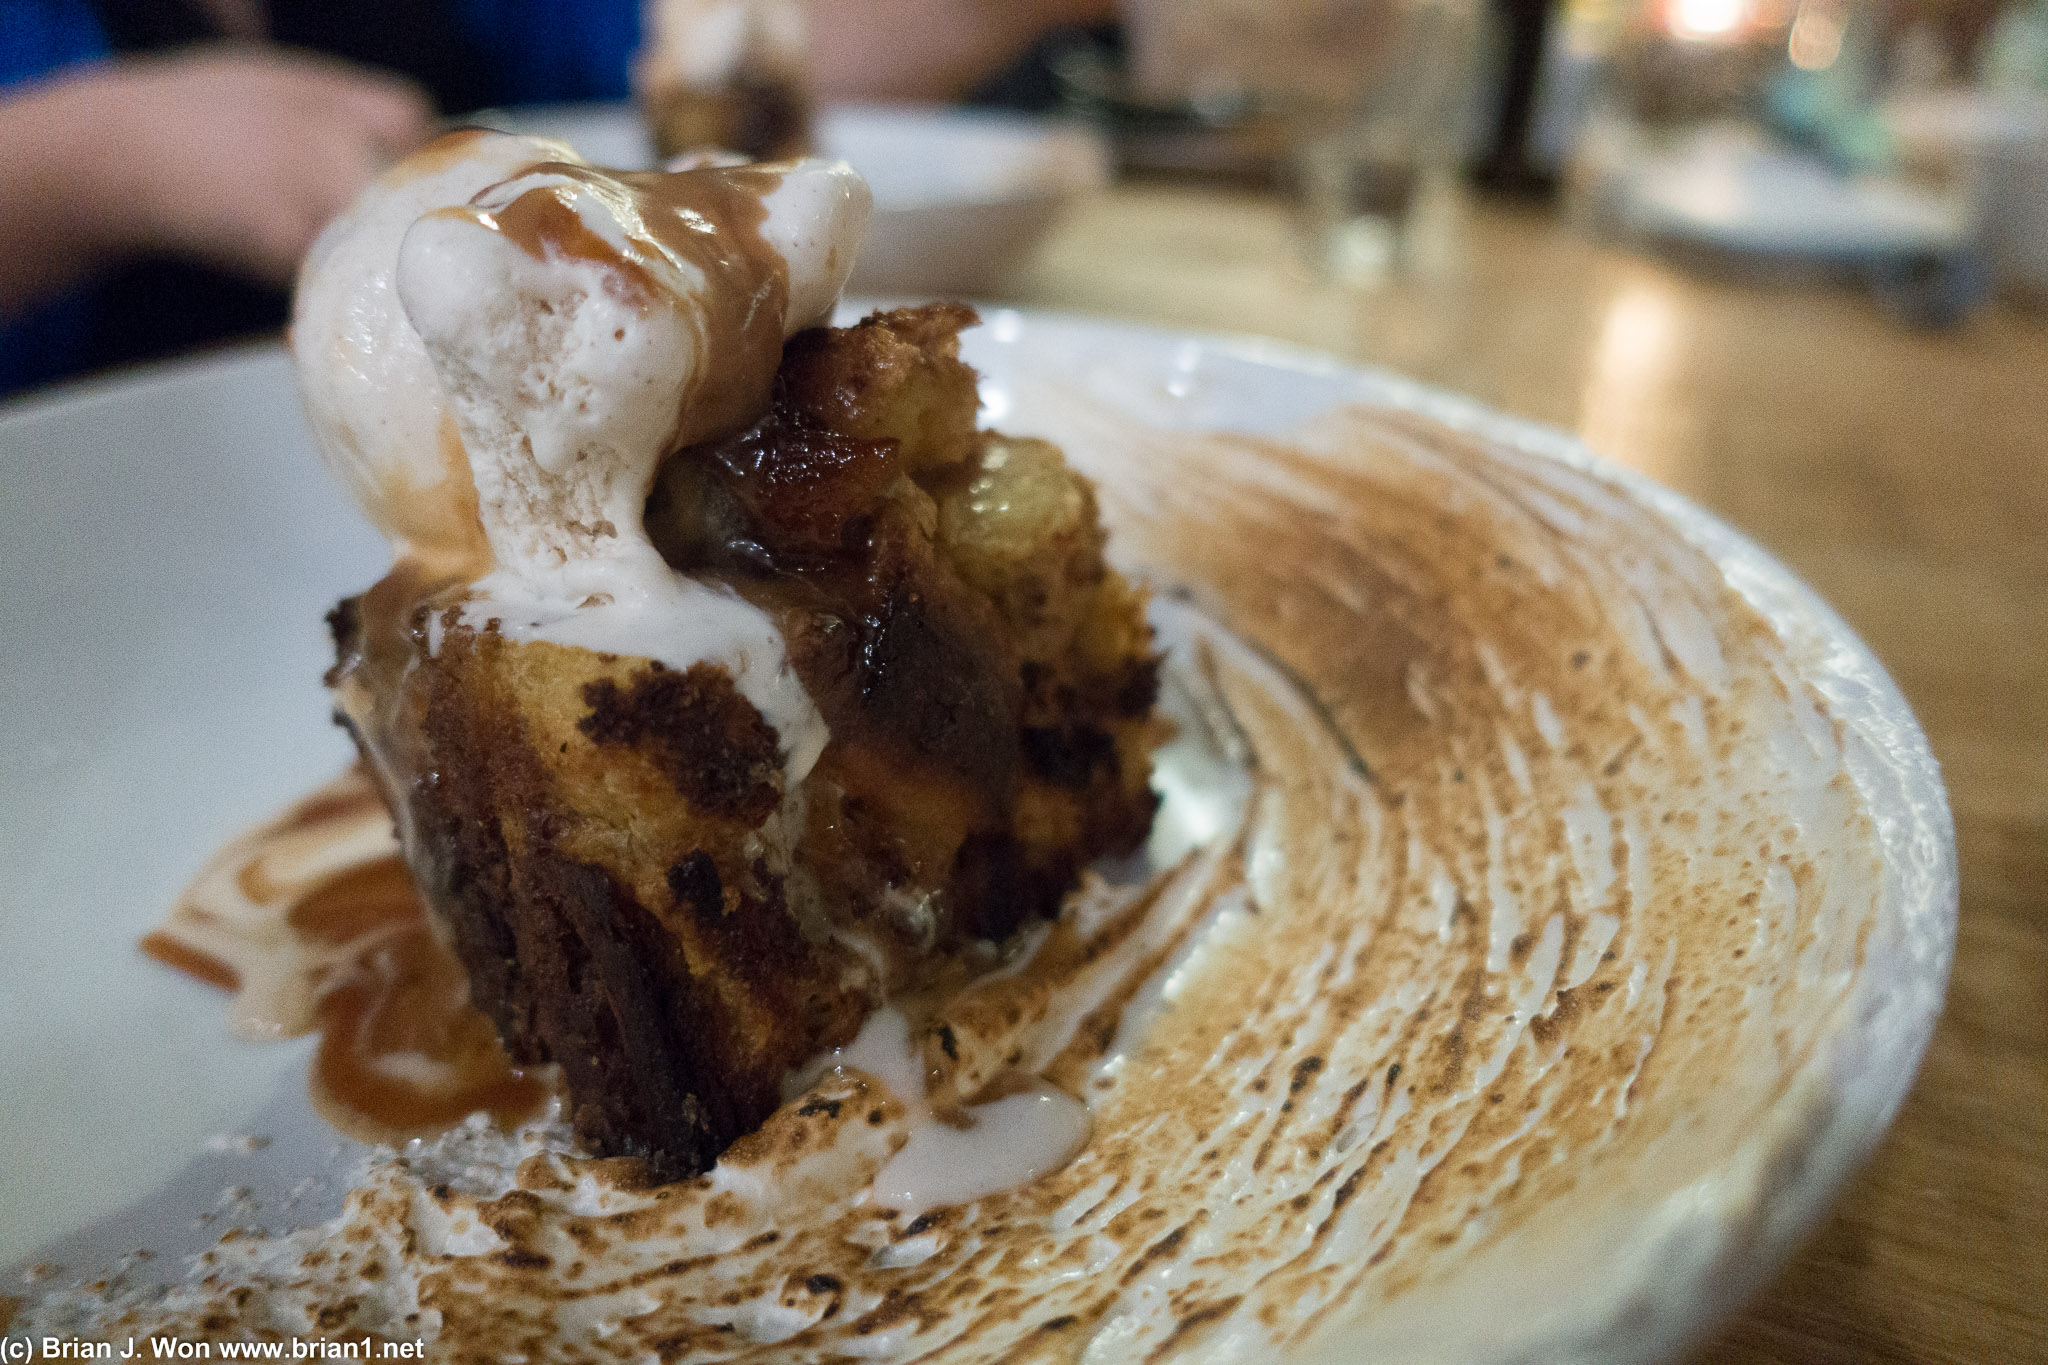 Bacon bread pudding. Just kinda sweet. Did not deliver.